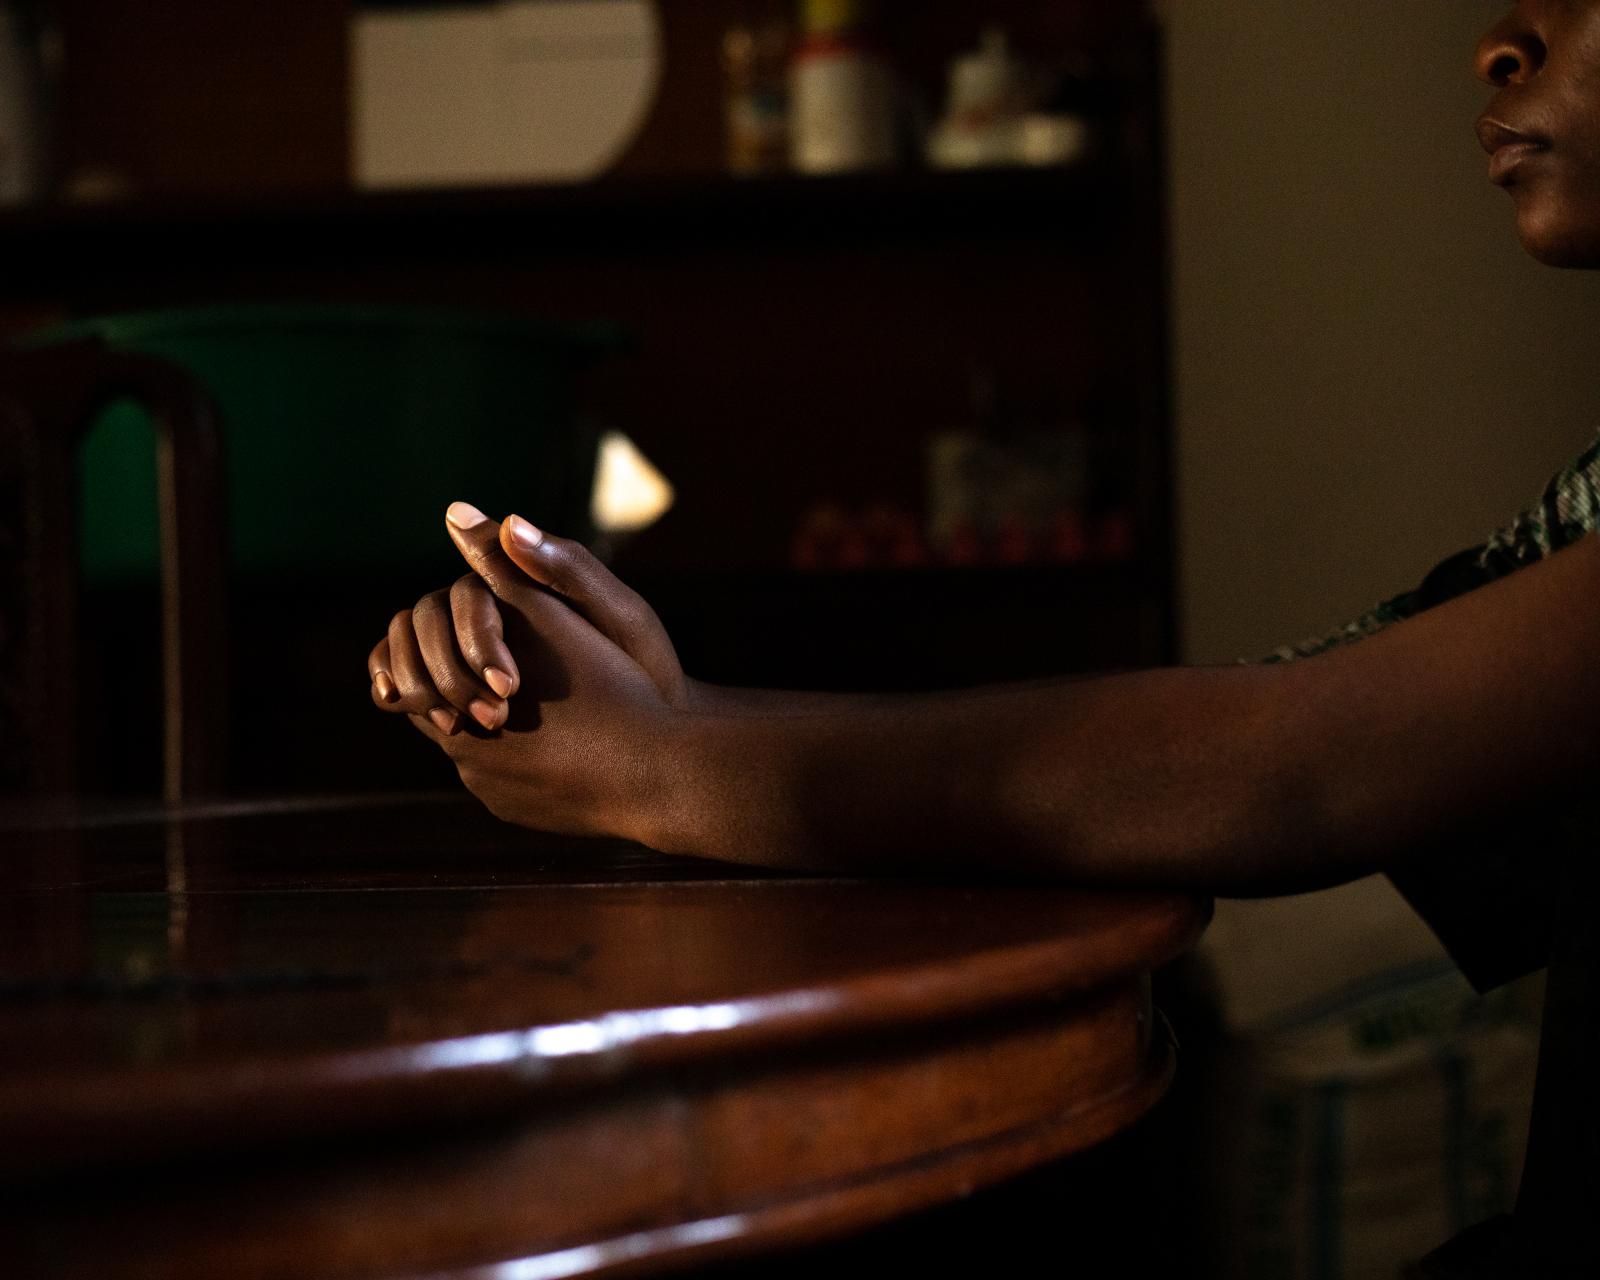 Image from Surviving Bery: A Girlhood Trauma | DeLovie Kwagala  - “This situation at times makes me really sad and I...